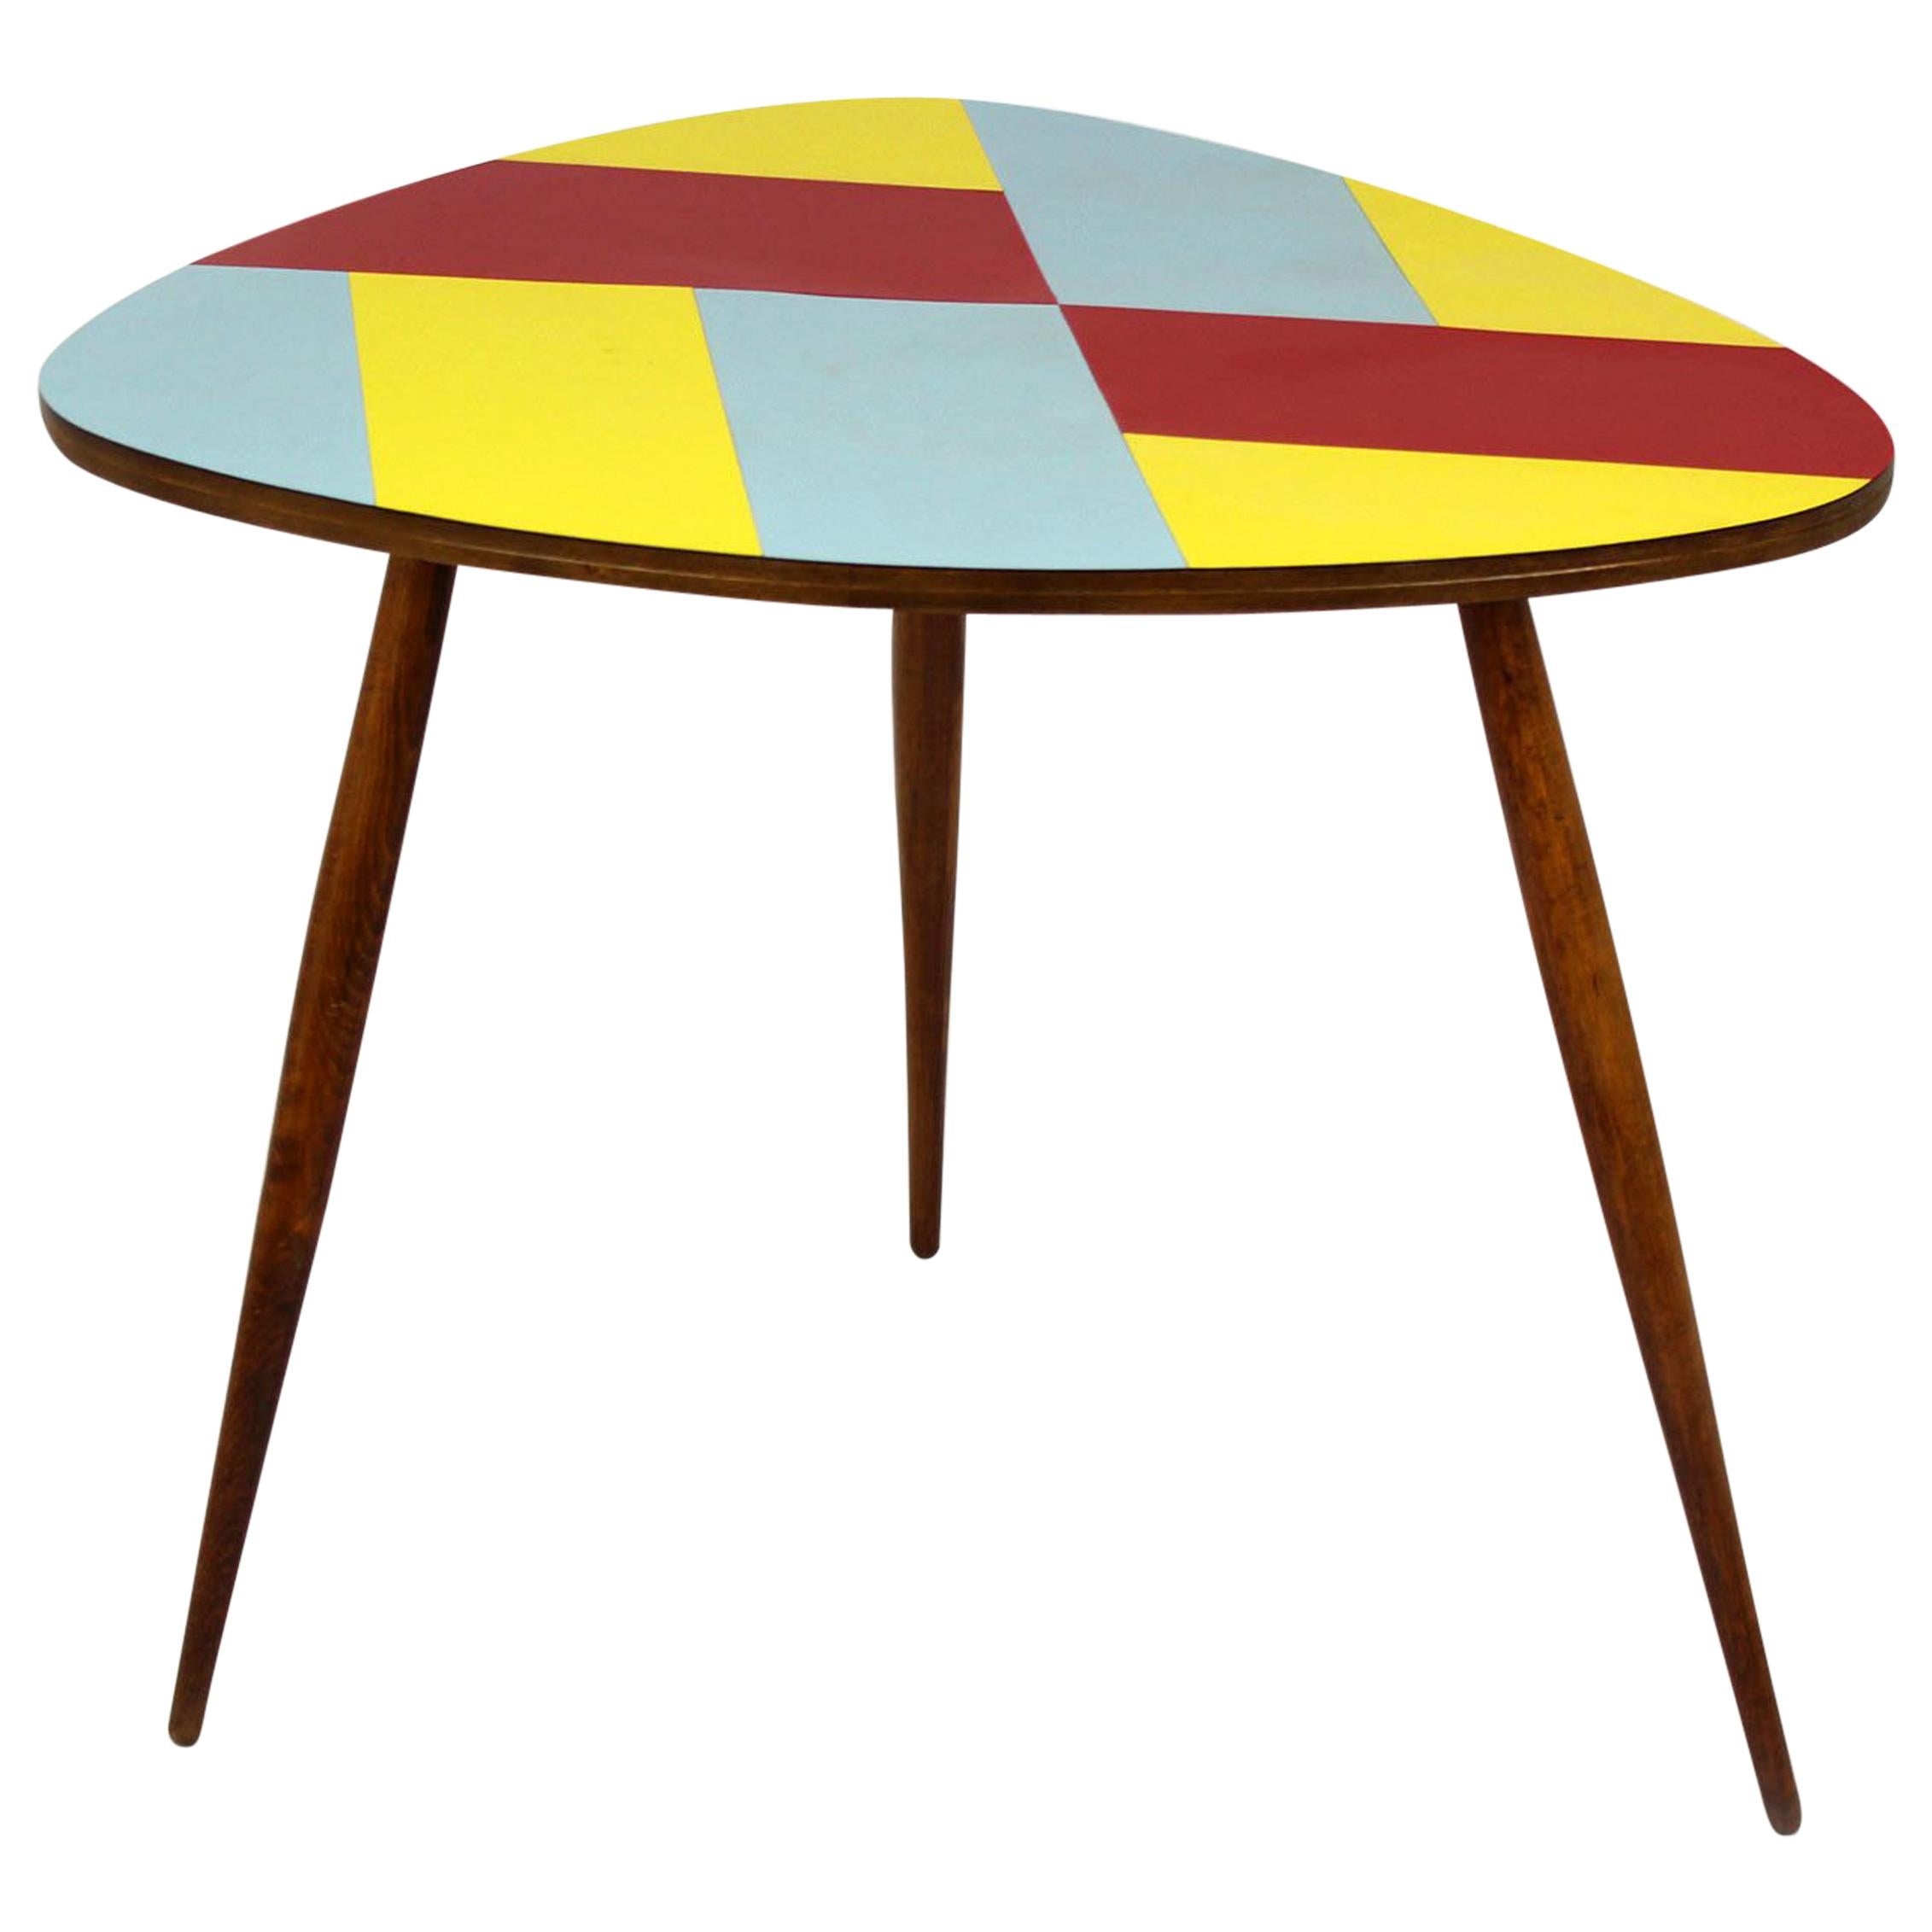 Czech Multicolored Formica Coffee Table, 1960s